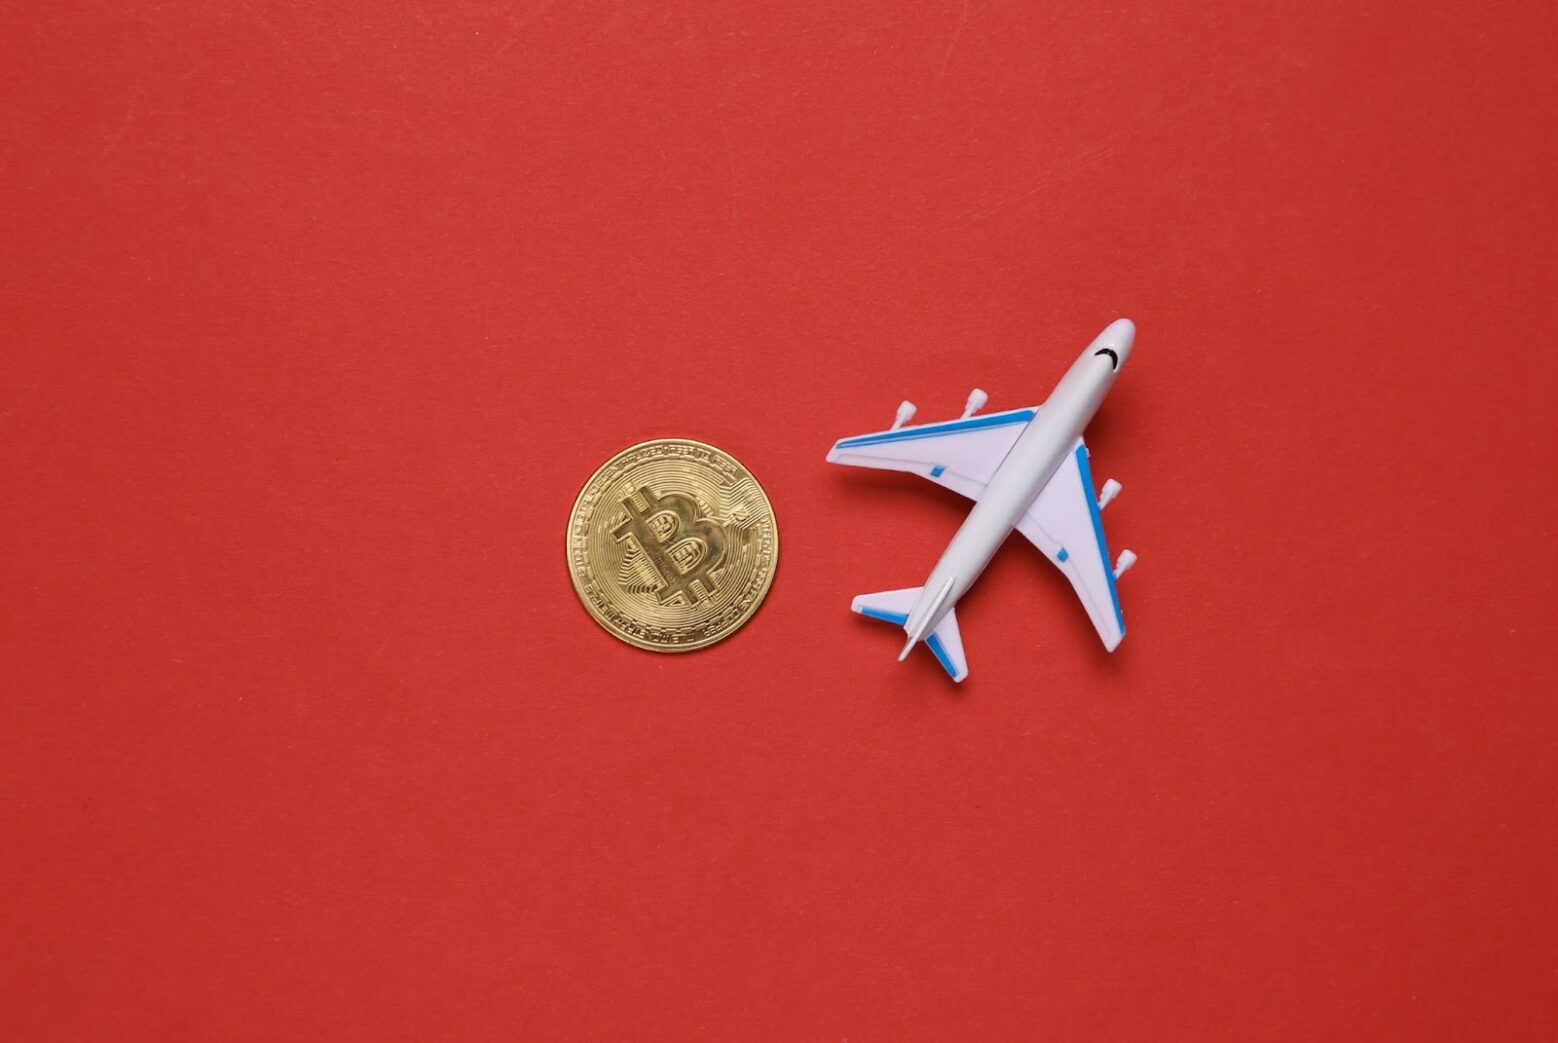 How to Buy Airline Tickets With Crypto?